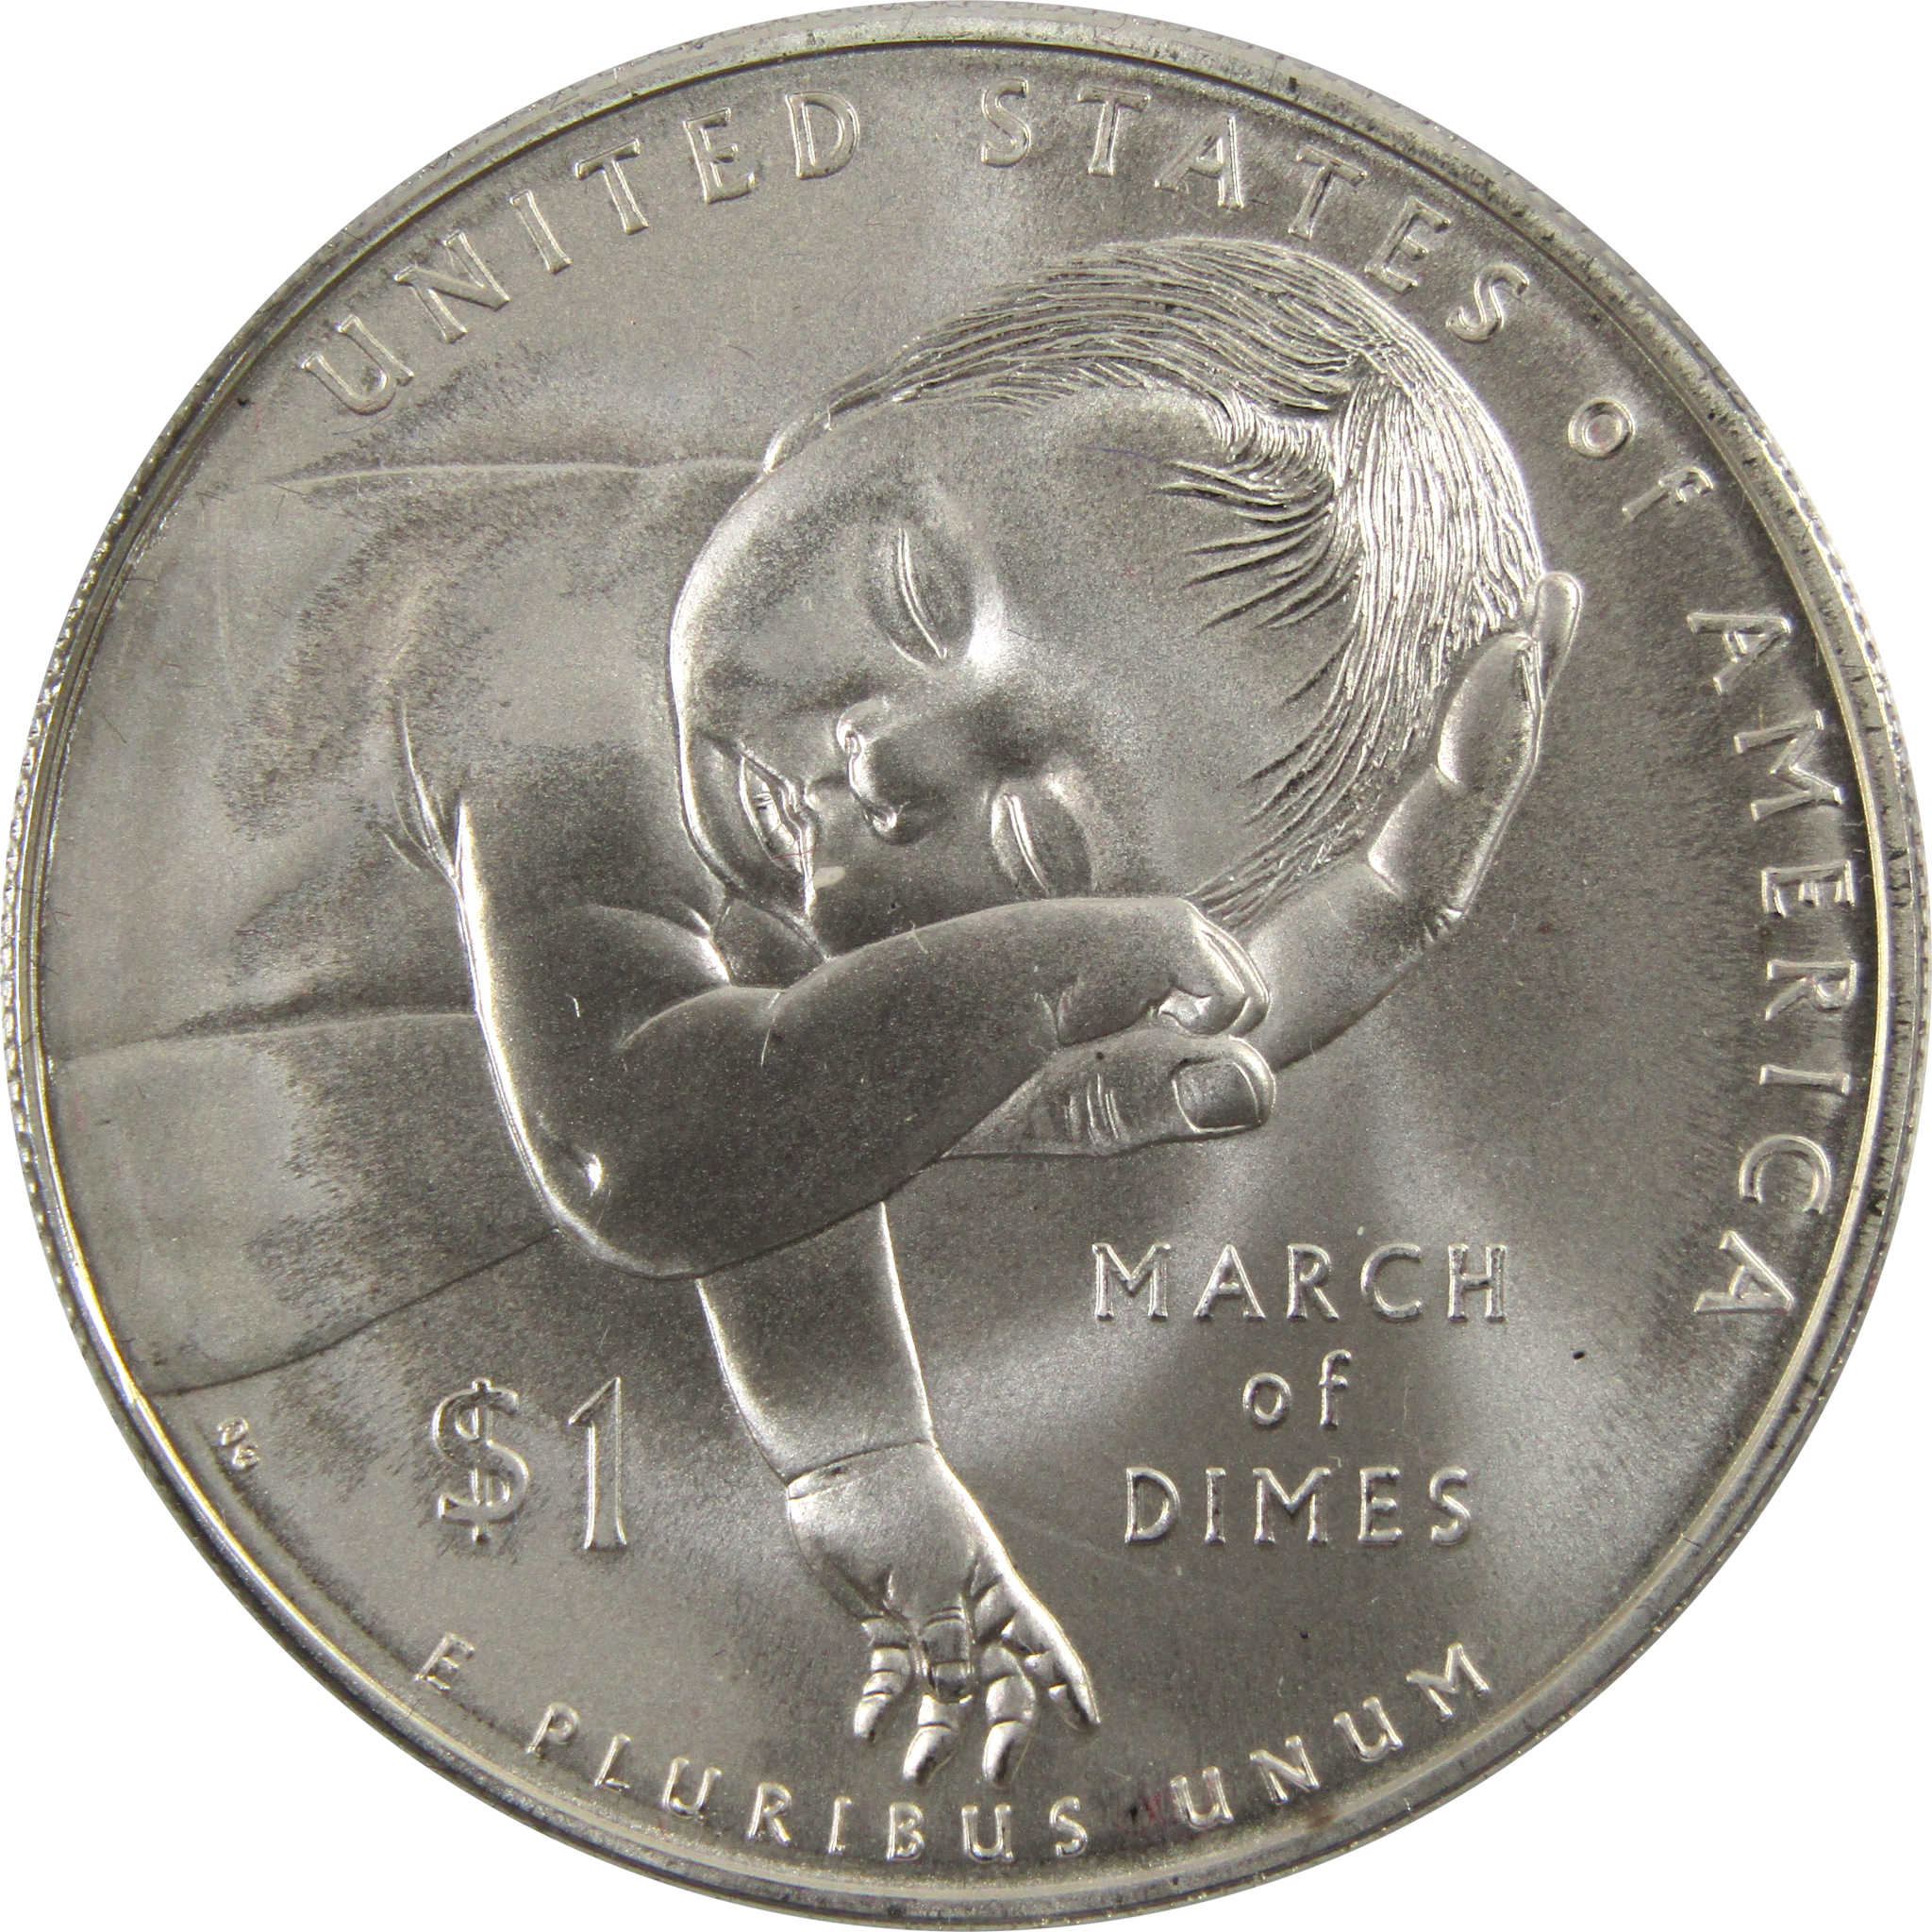 March of Dimes Dollar 2015 P Uncirculated Silver $1 Coin SKU:CPC2698